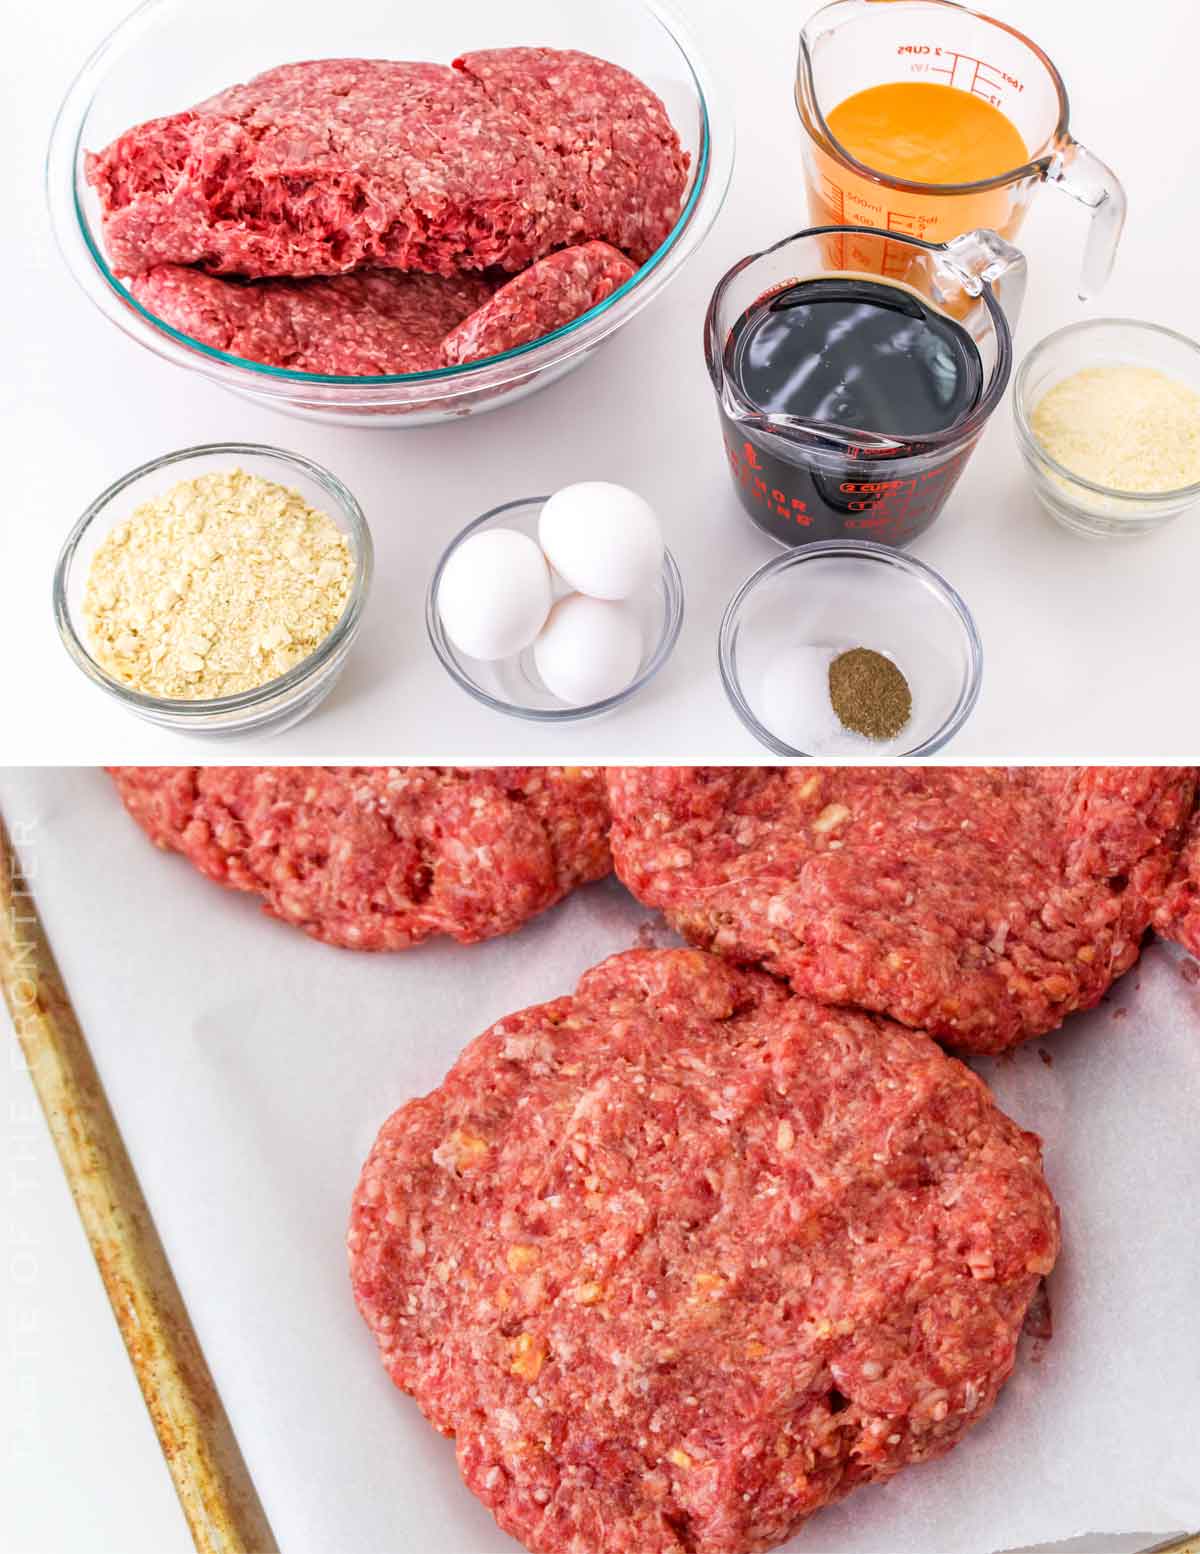 ingredients for homemade burgers